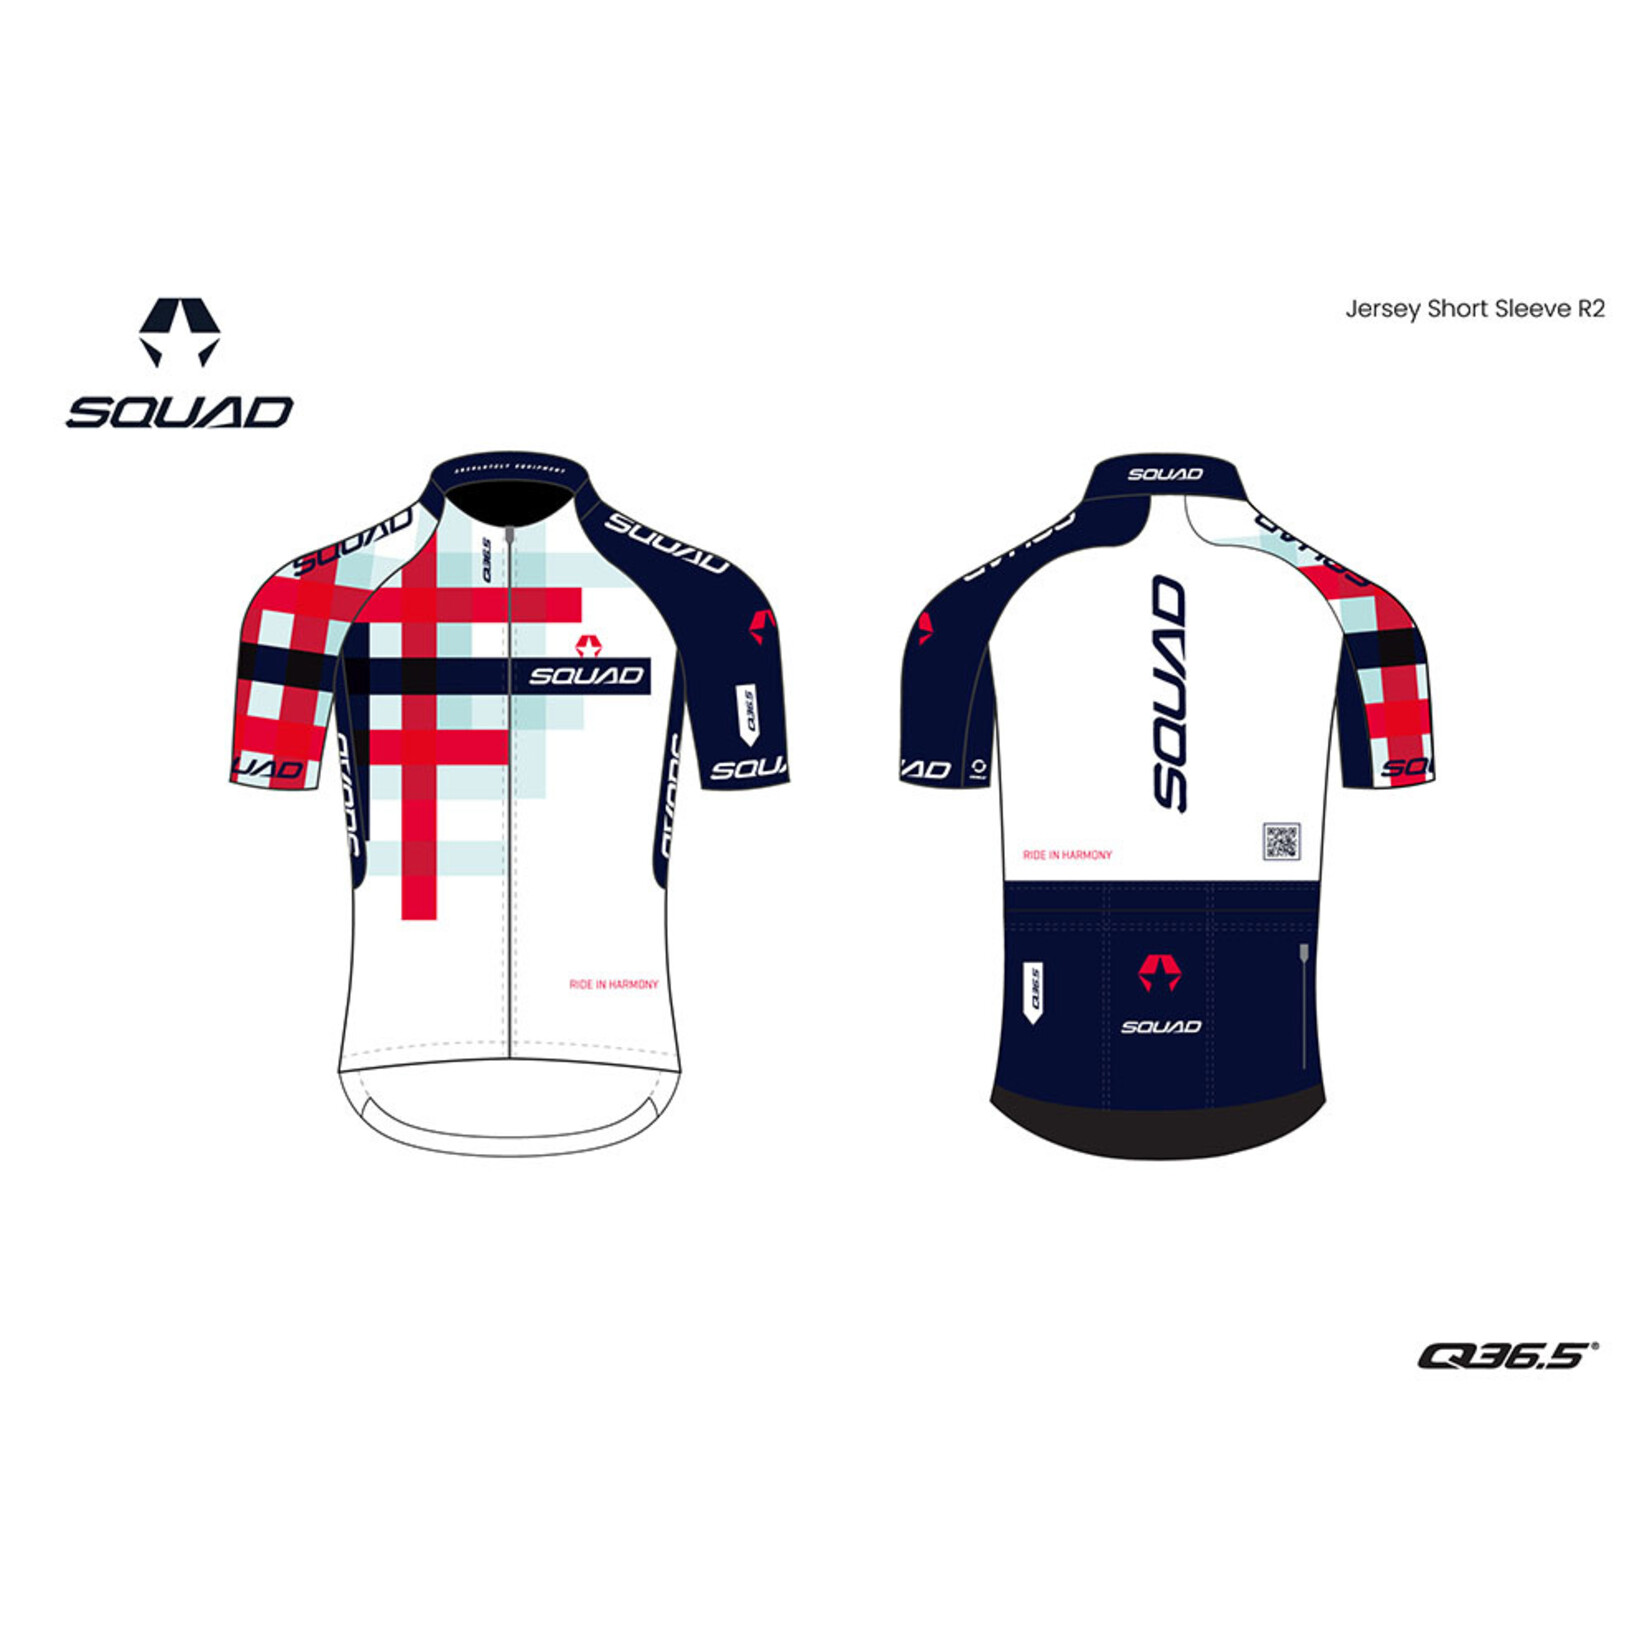 Q36.5 Squad Pro Cycling Team Short Sleeve Jersey